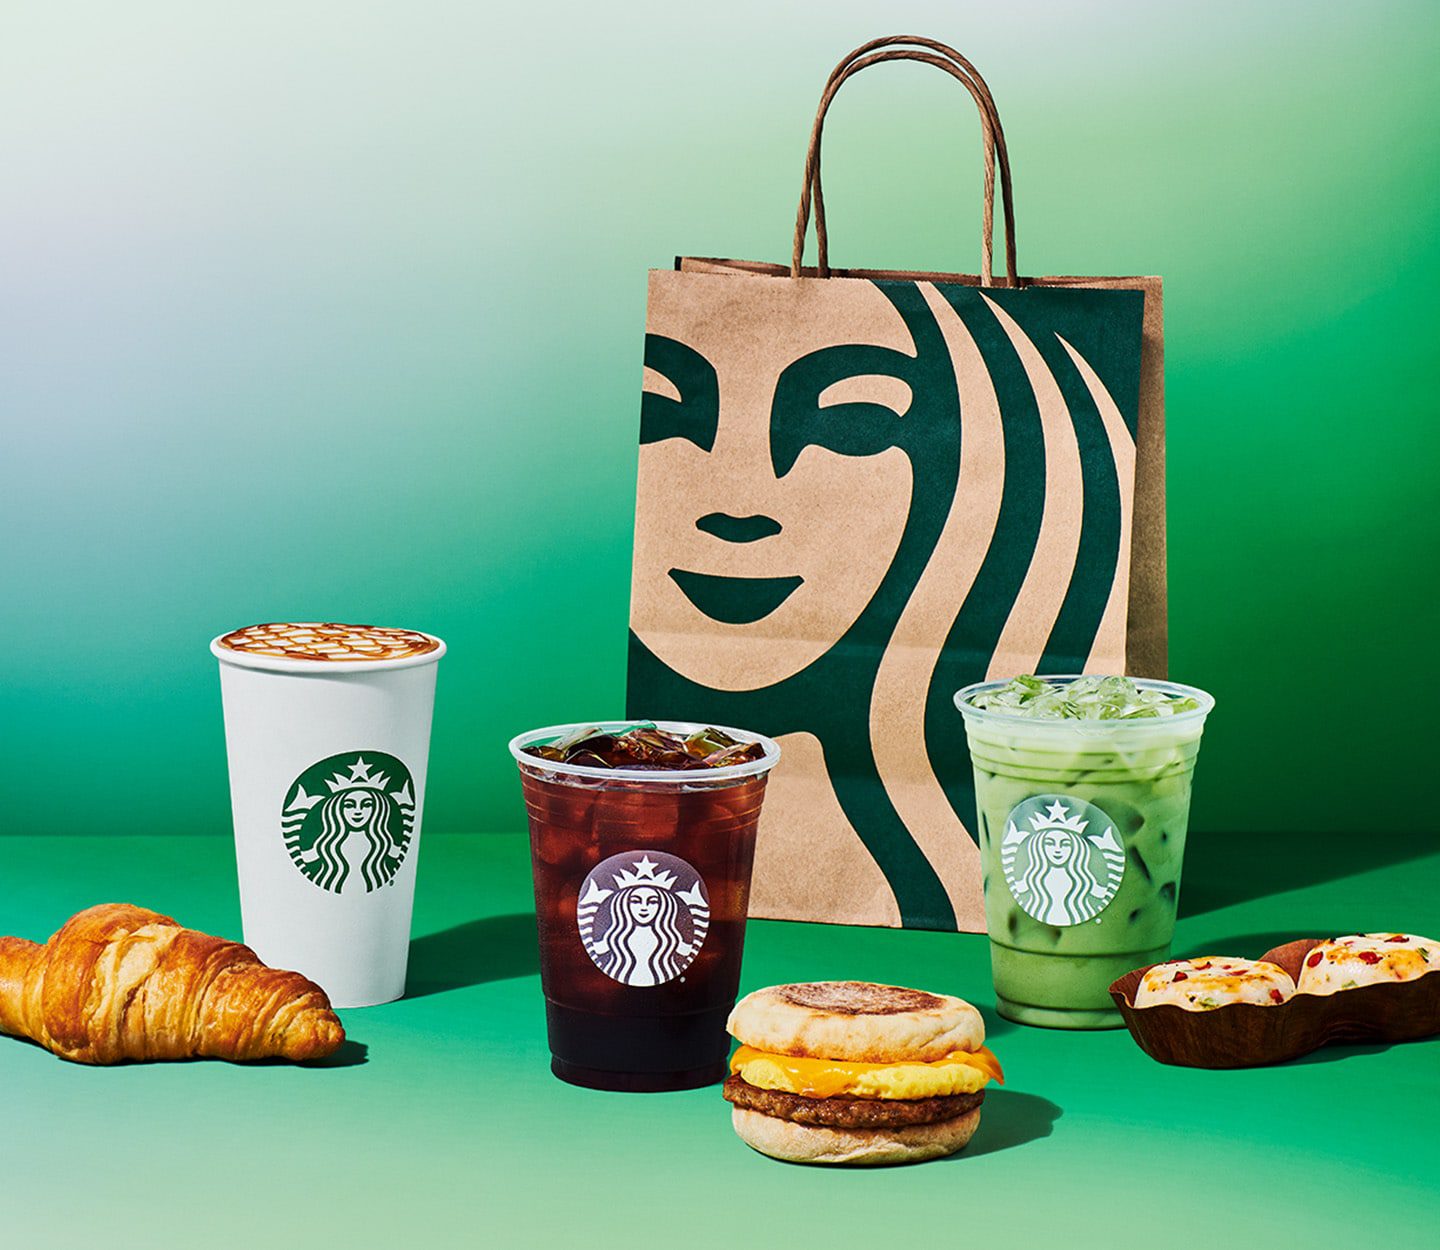 Can You Use Starbucks Gift Cards on Uber Eats